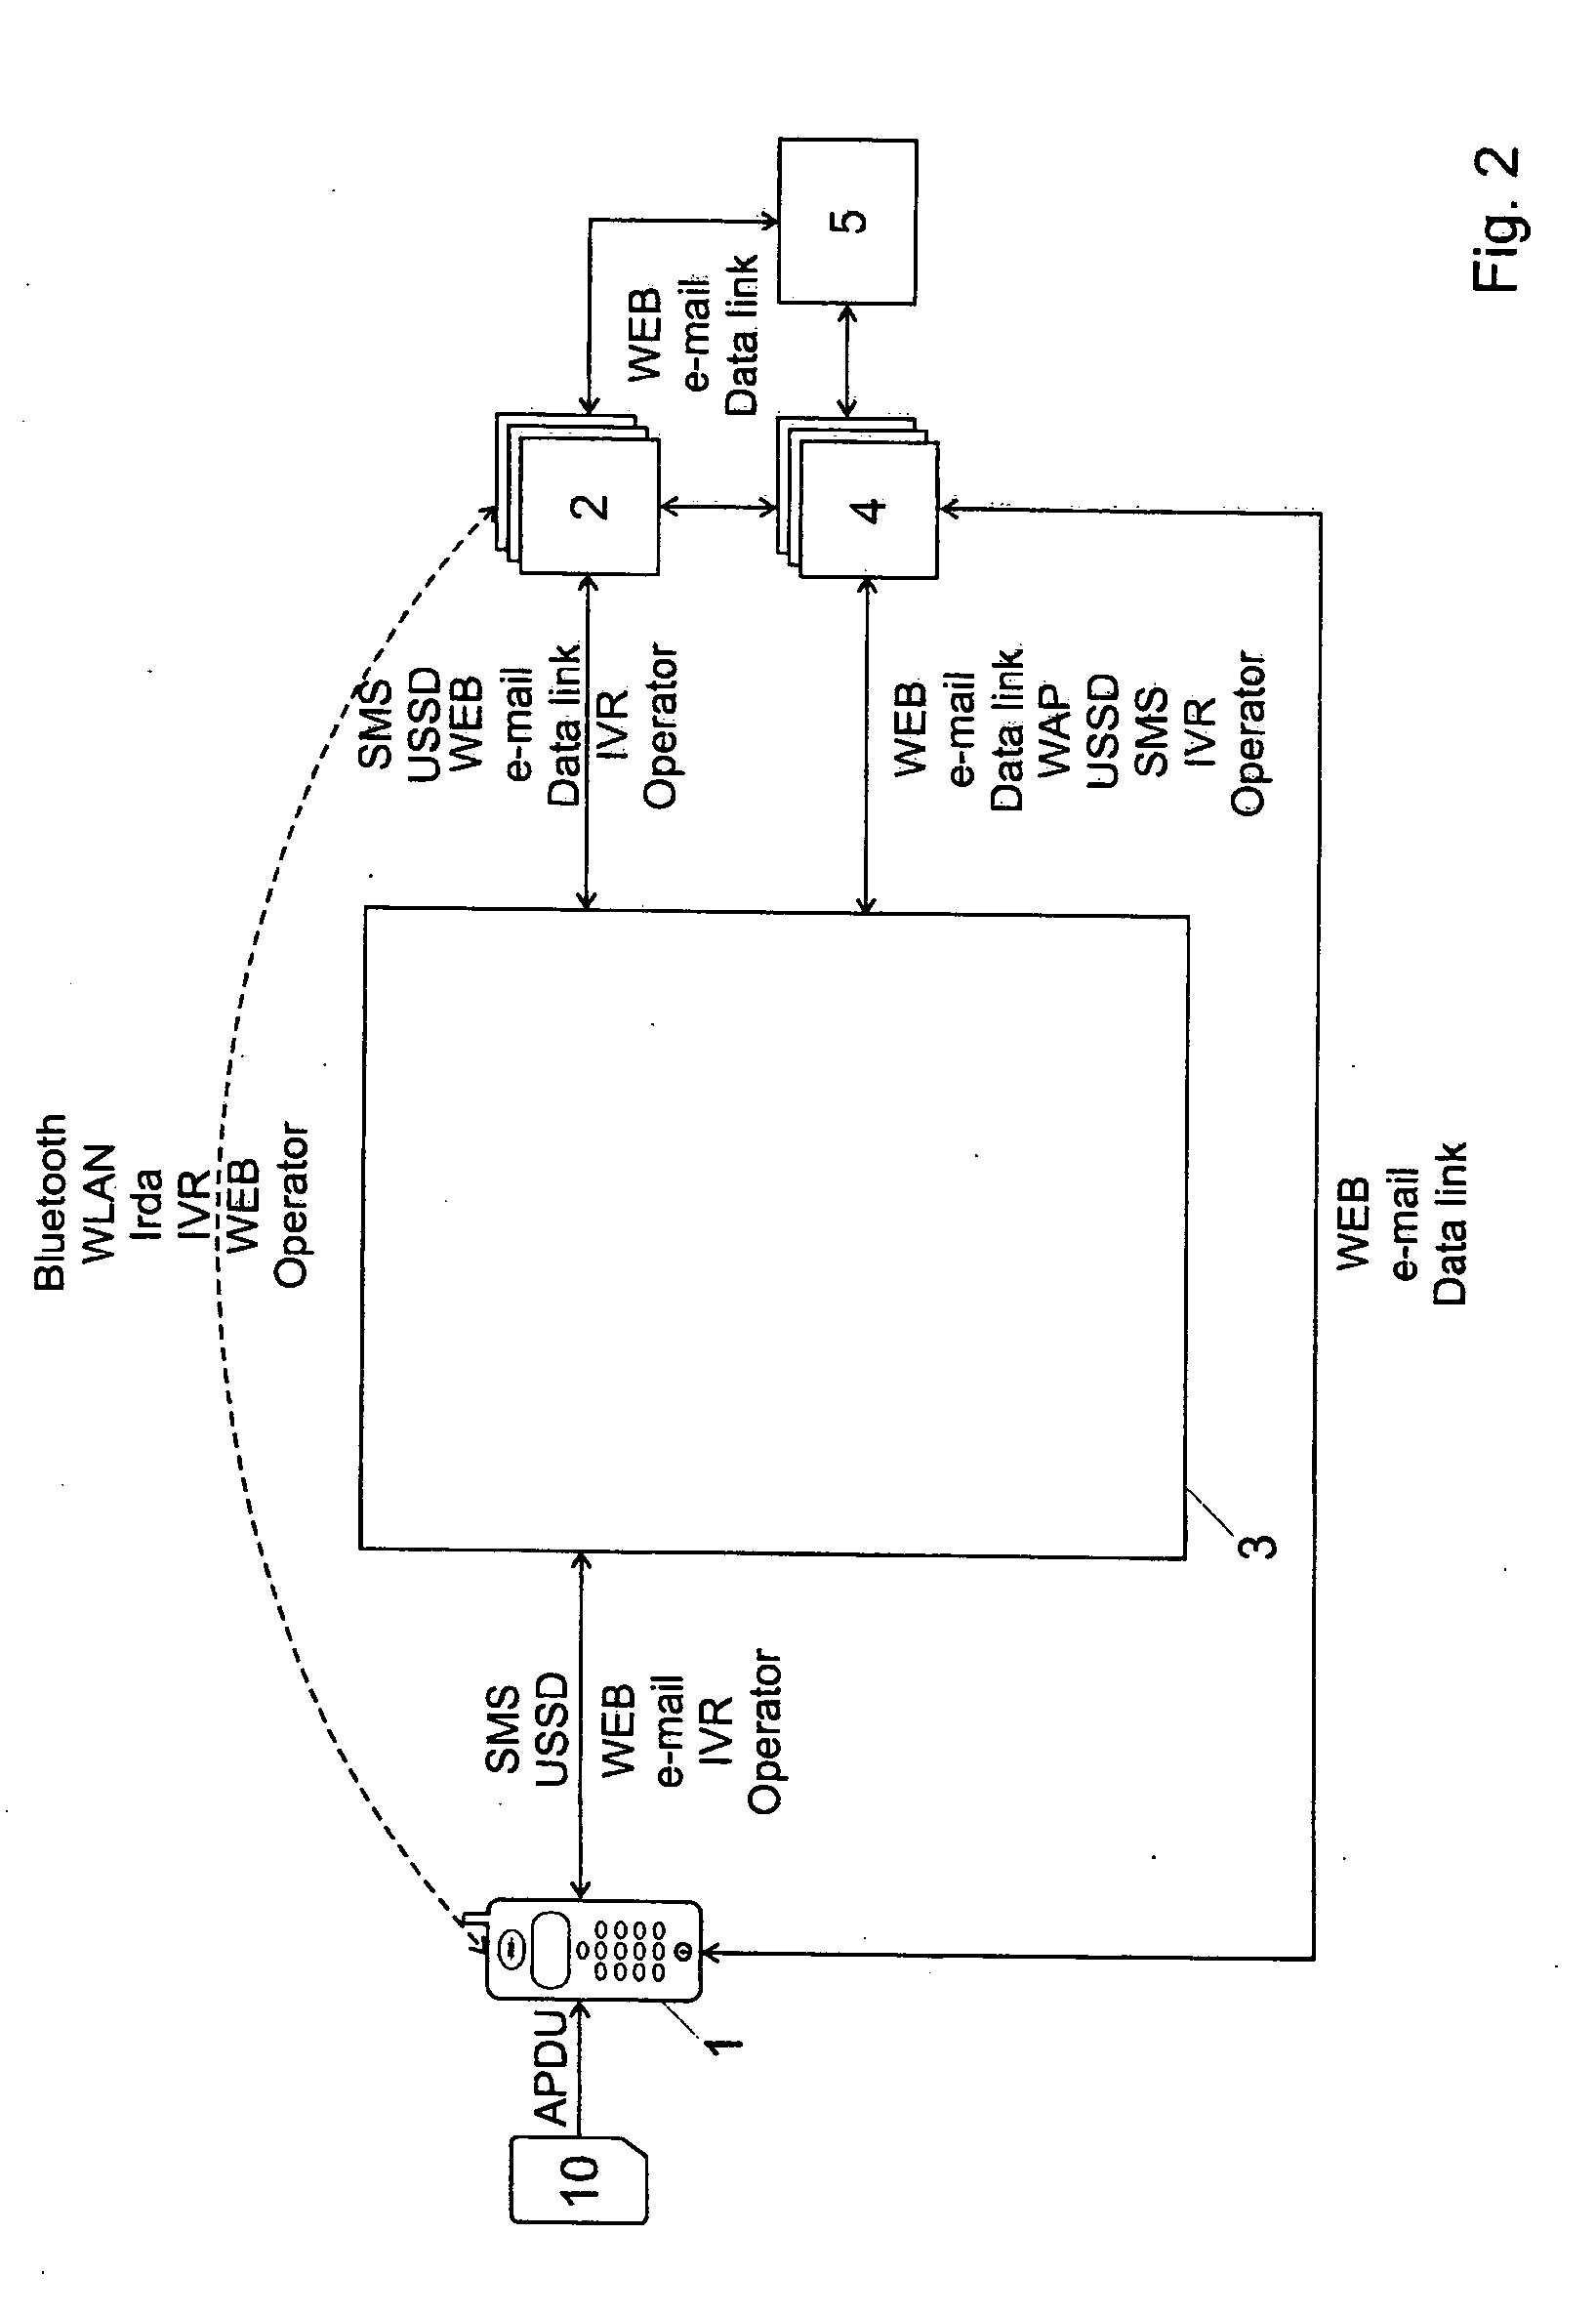 Method and system for detecting possible frauds in payment transactions